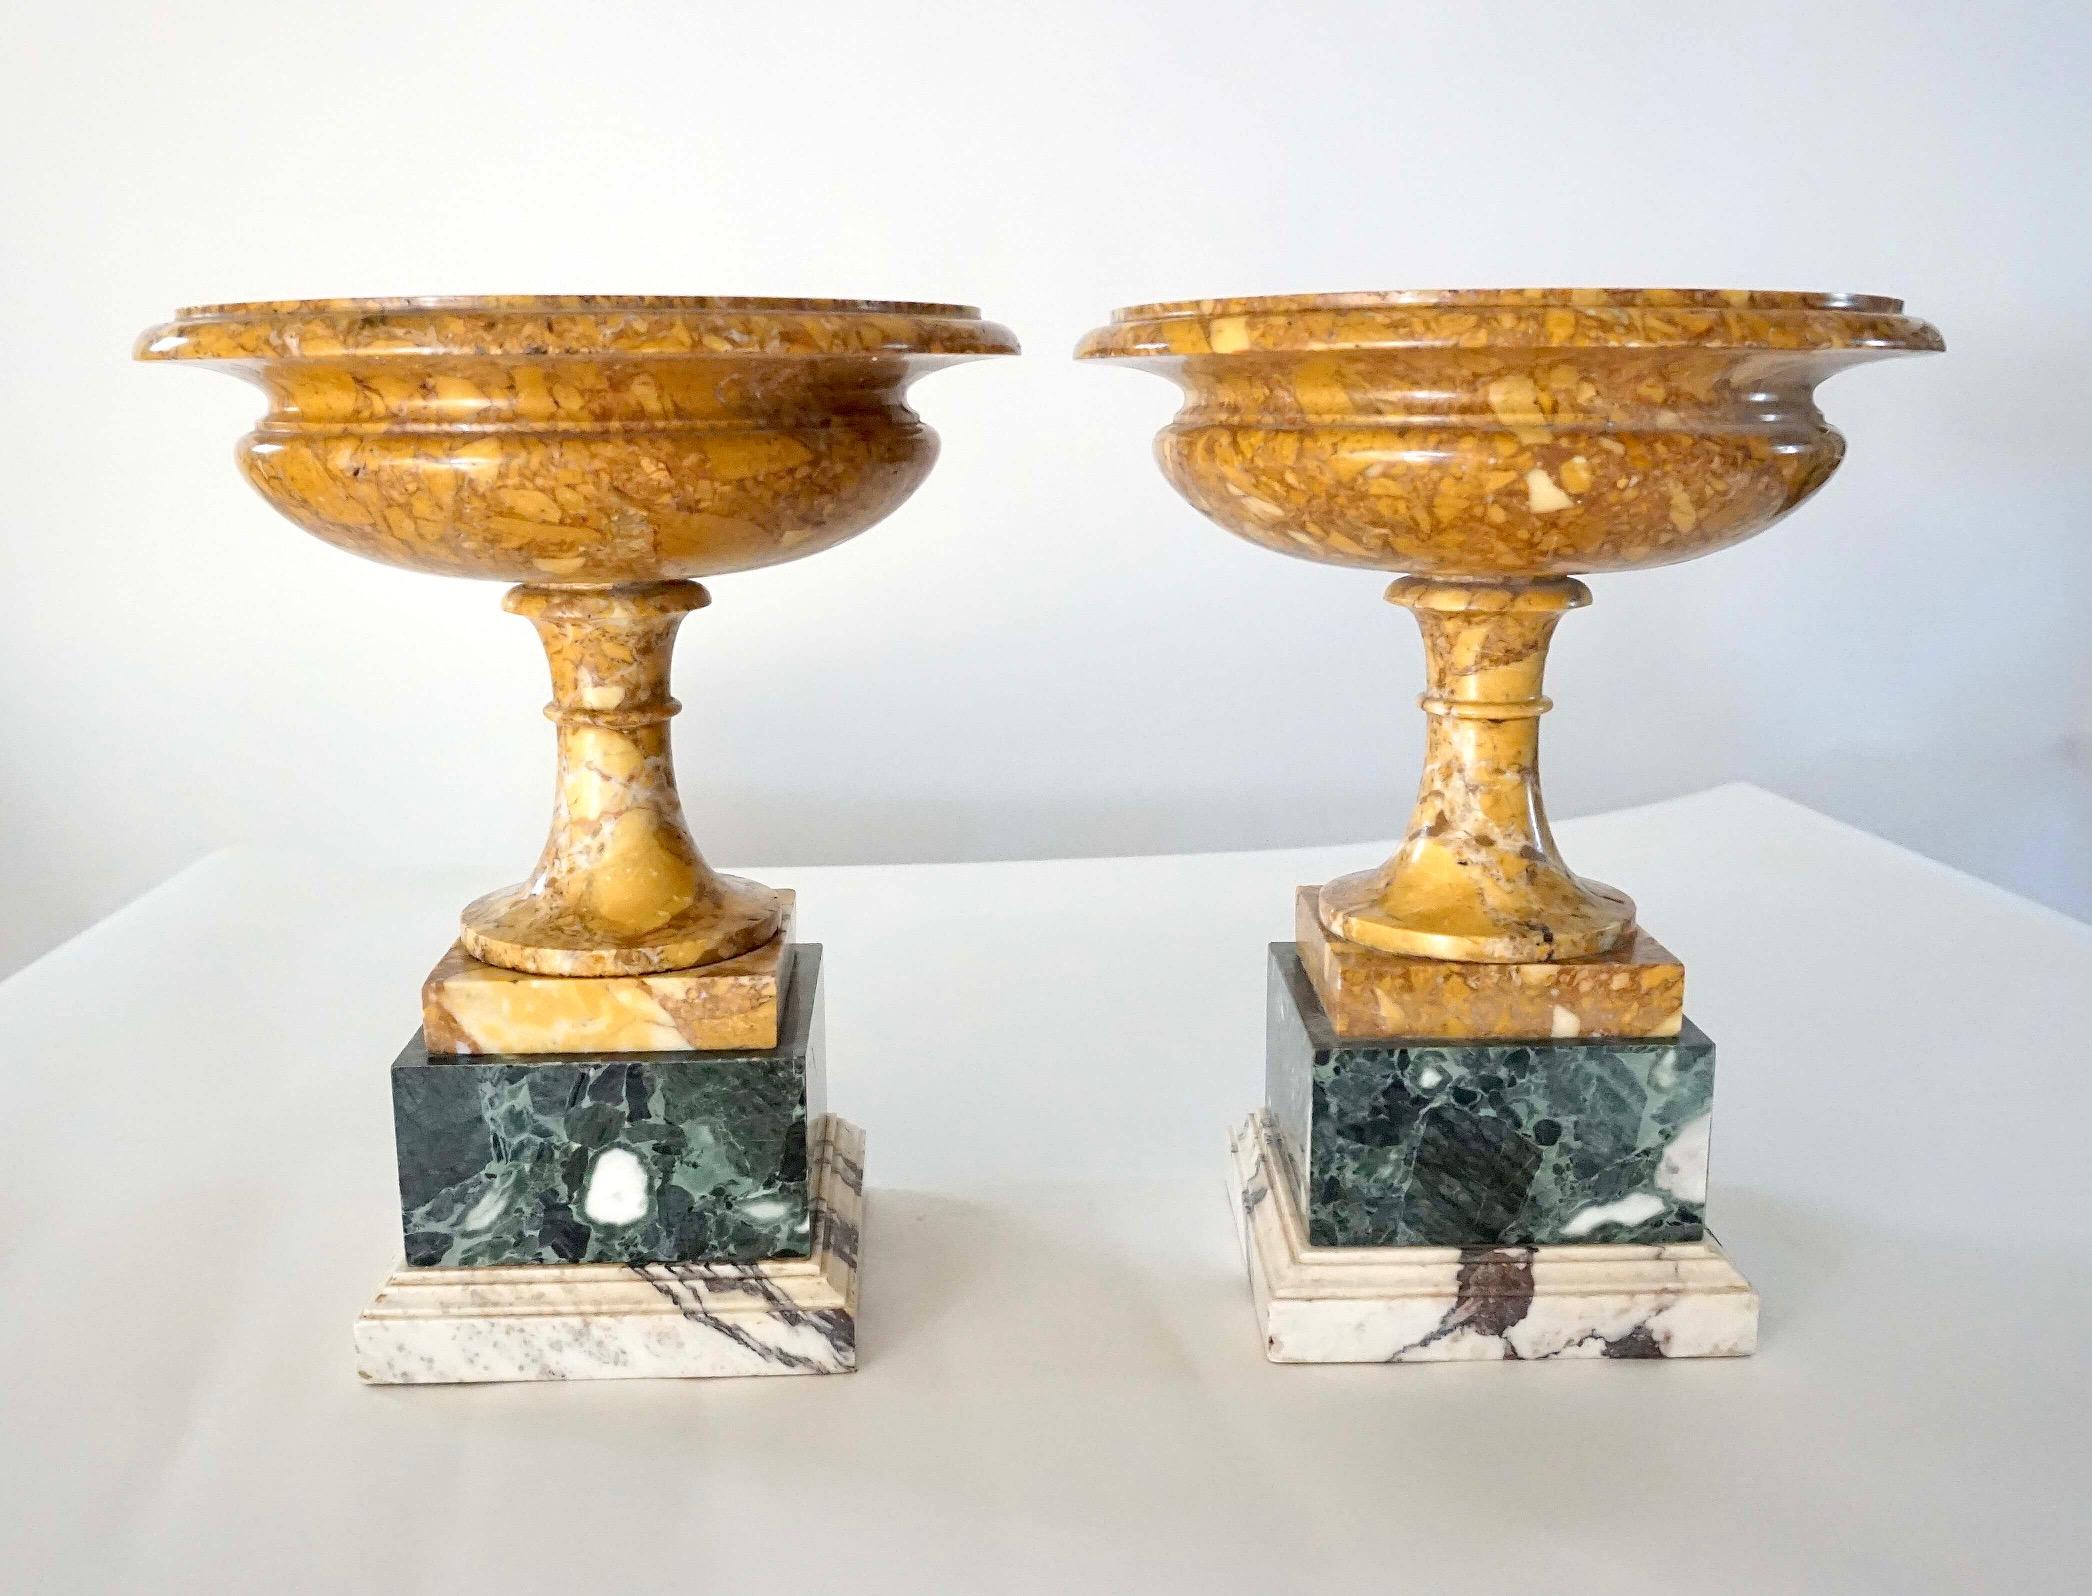 Pair of 19th Century Italian Neoclassical Tazze in Polychrome Marbles For Sale 1